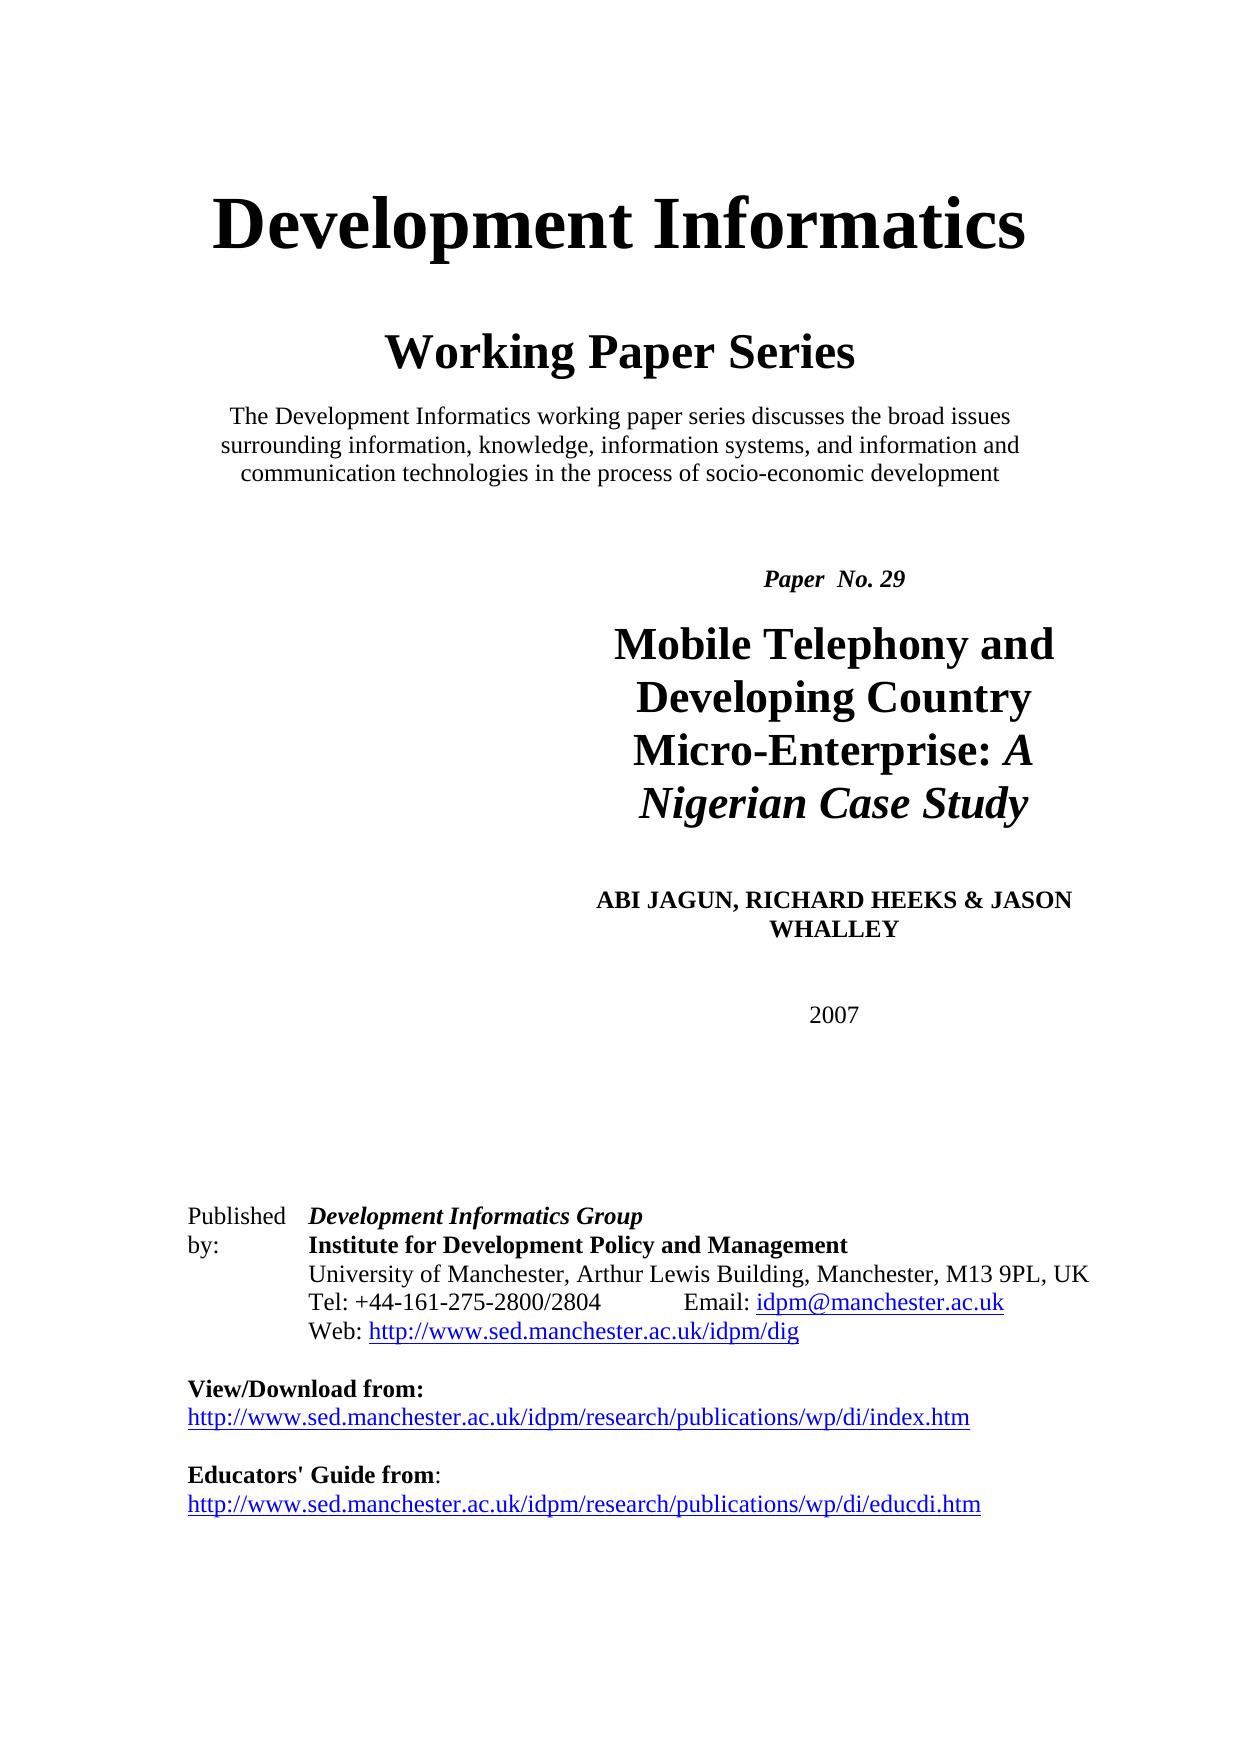 IDPM Development Informatics paper no.29: Mobile Telephony and Developing Country Micro-Enterprise